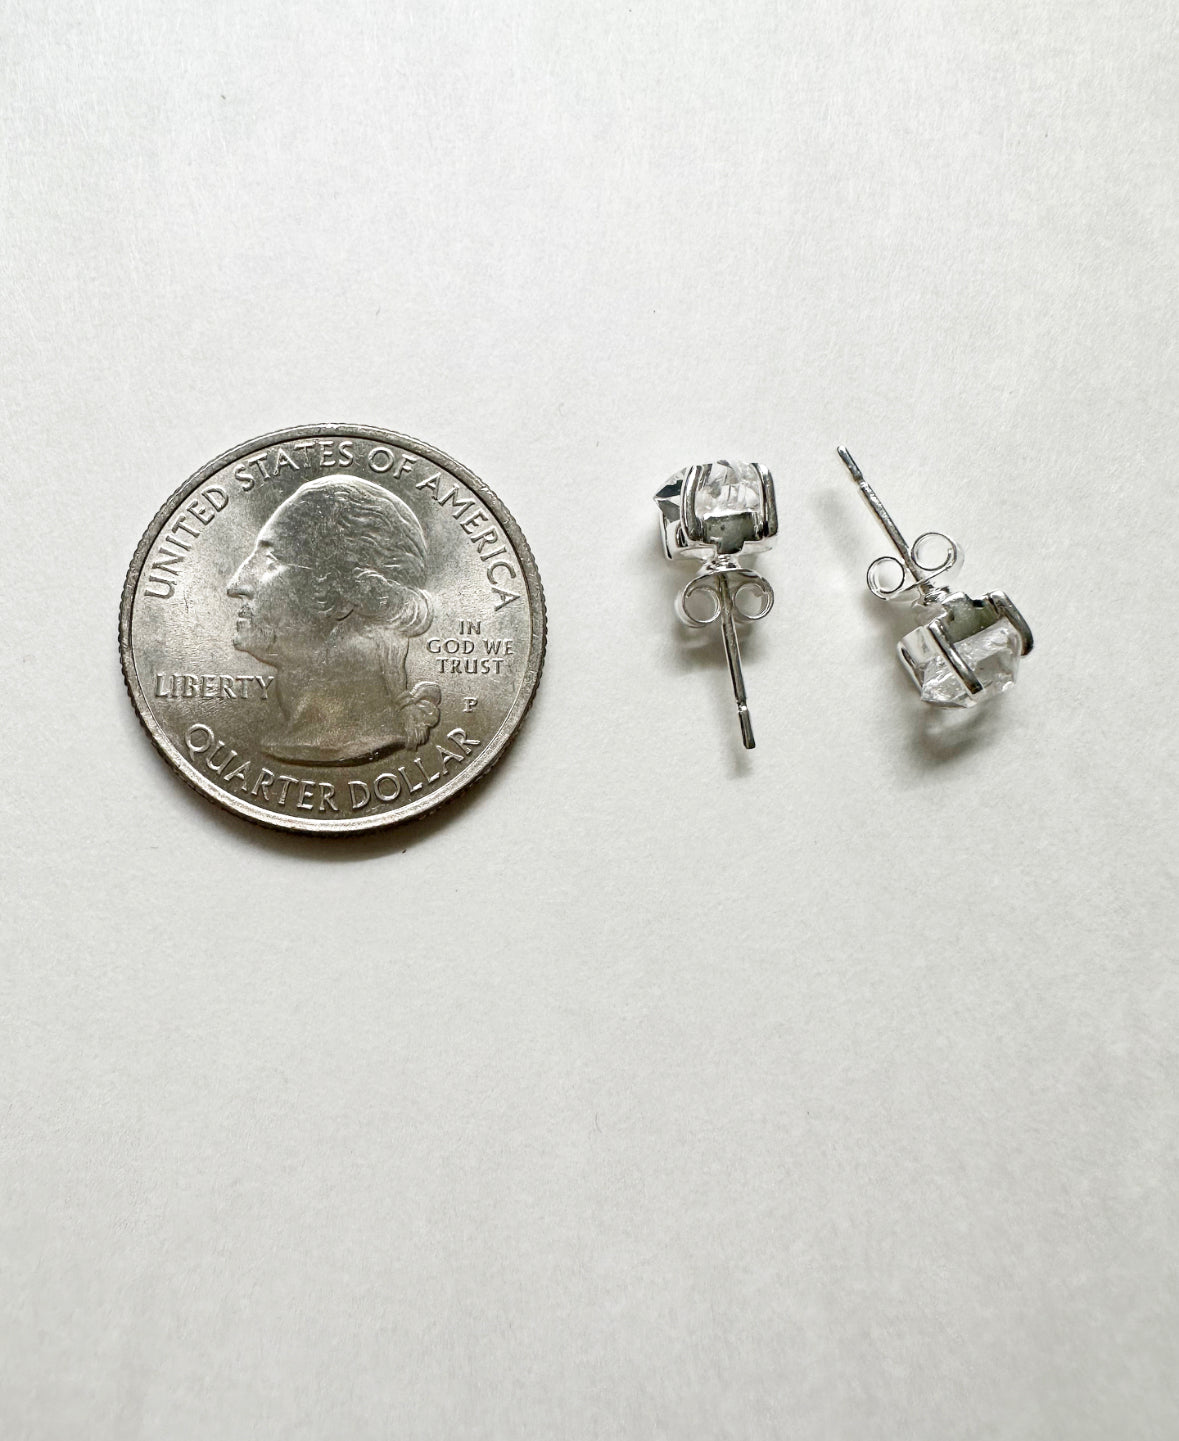 Herkimer diamond stud earrings next to a quarter for size comparison.